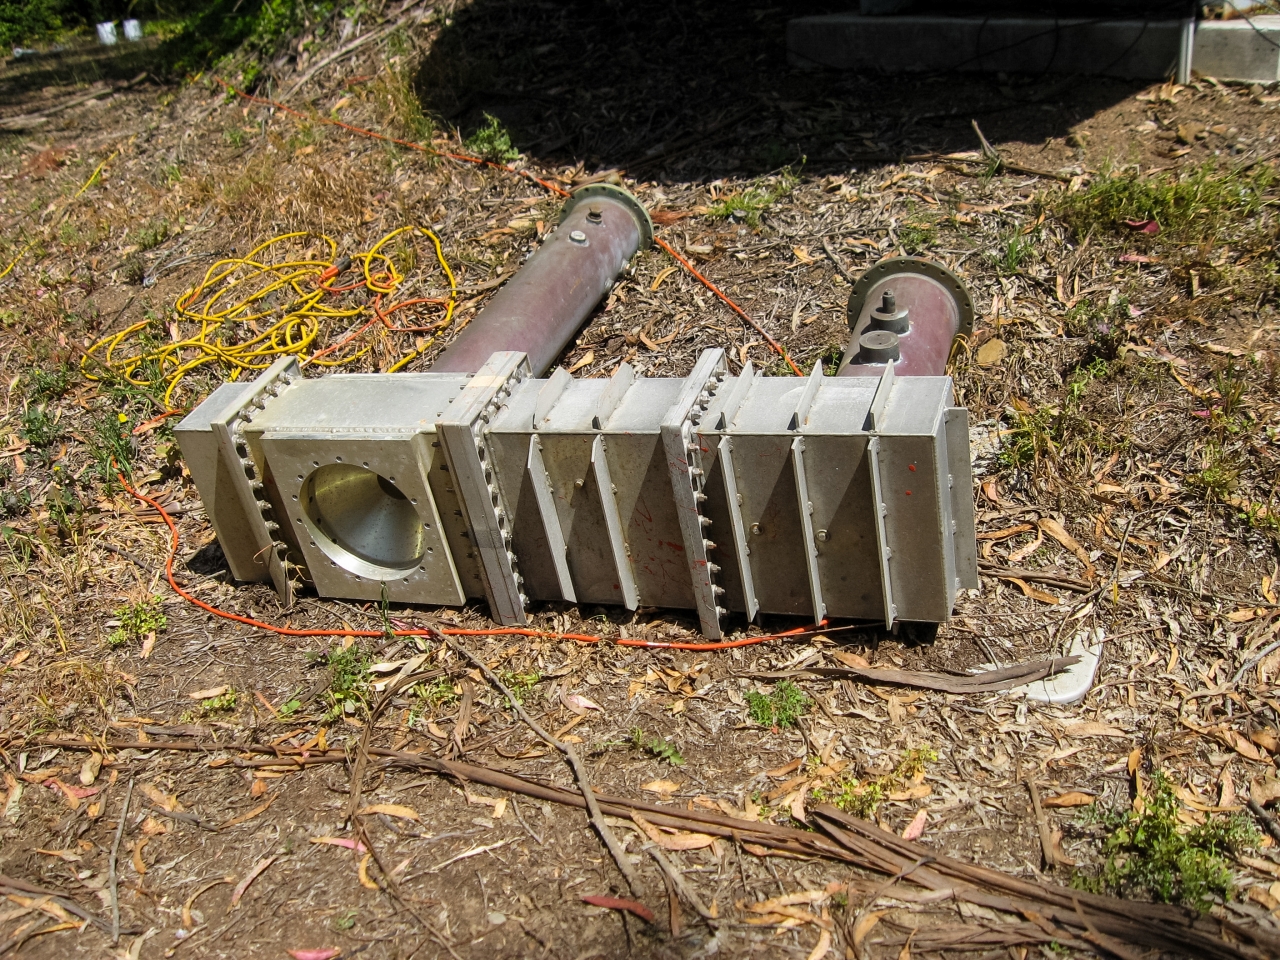 The Sutro Tower DTV conversion project in progress, many components like this new and old are laying about.